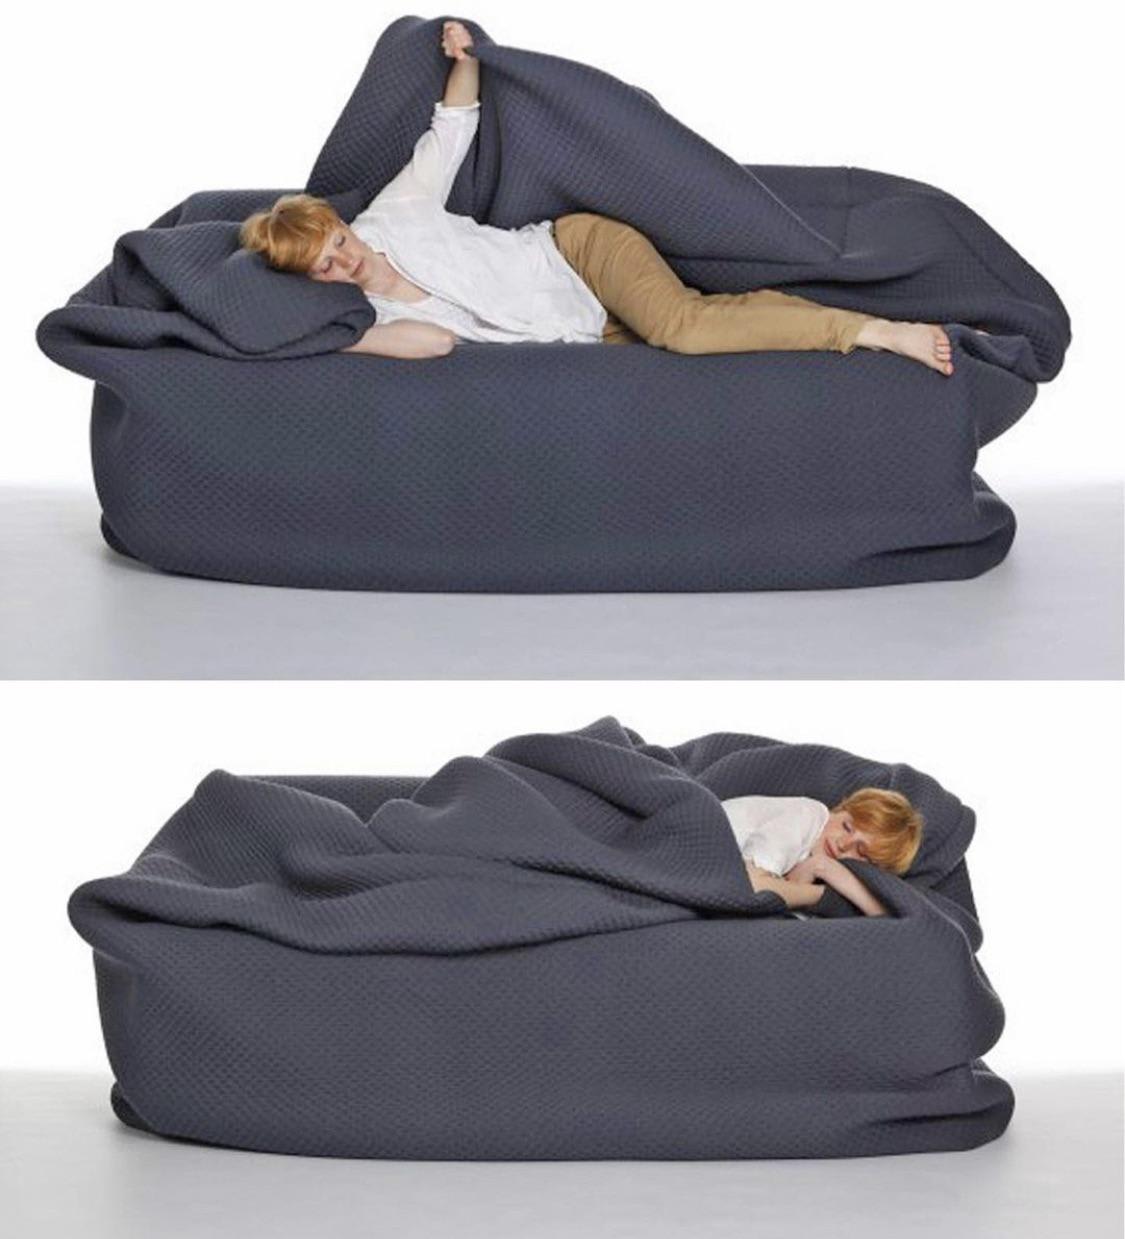 Bean bag with built-in blanket and pillow!